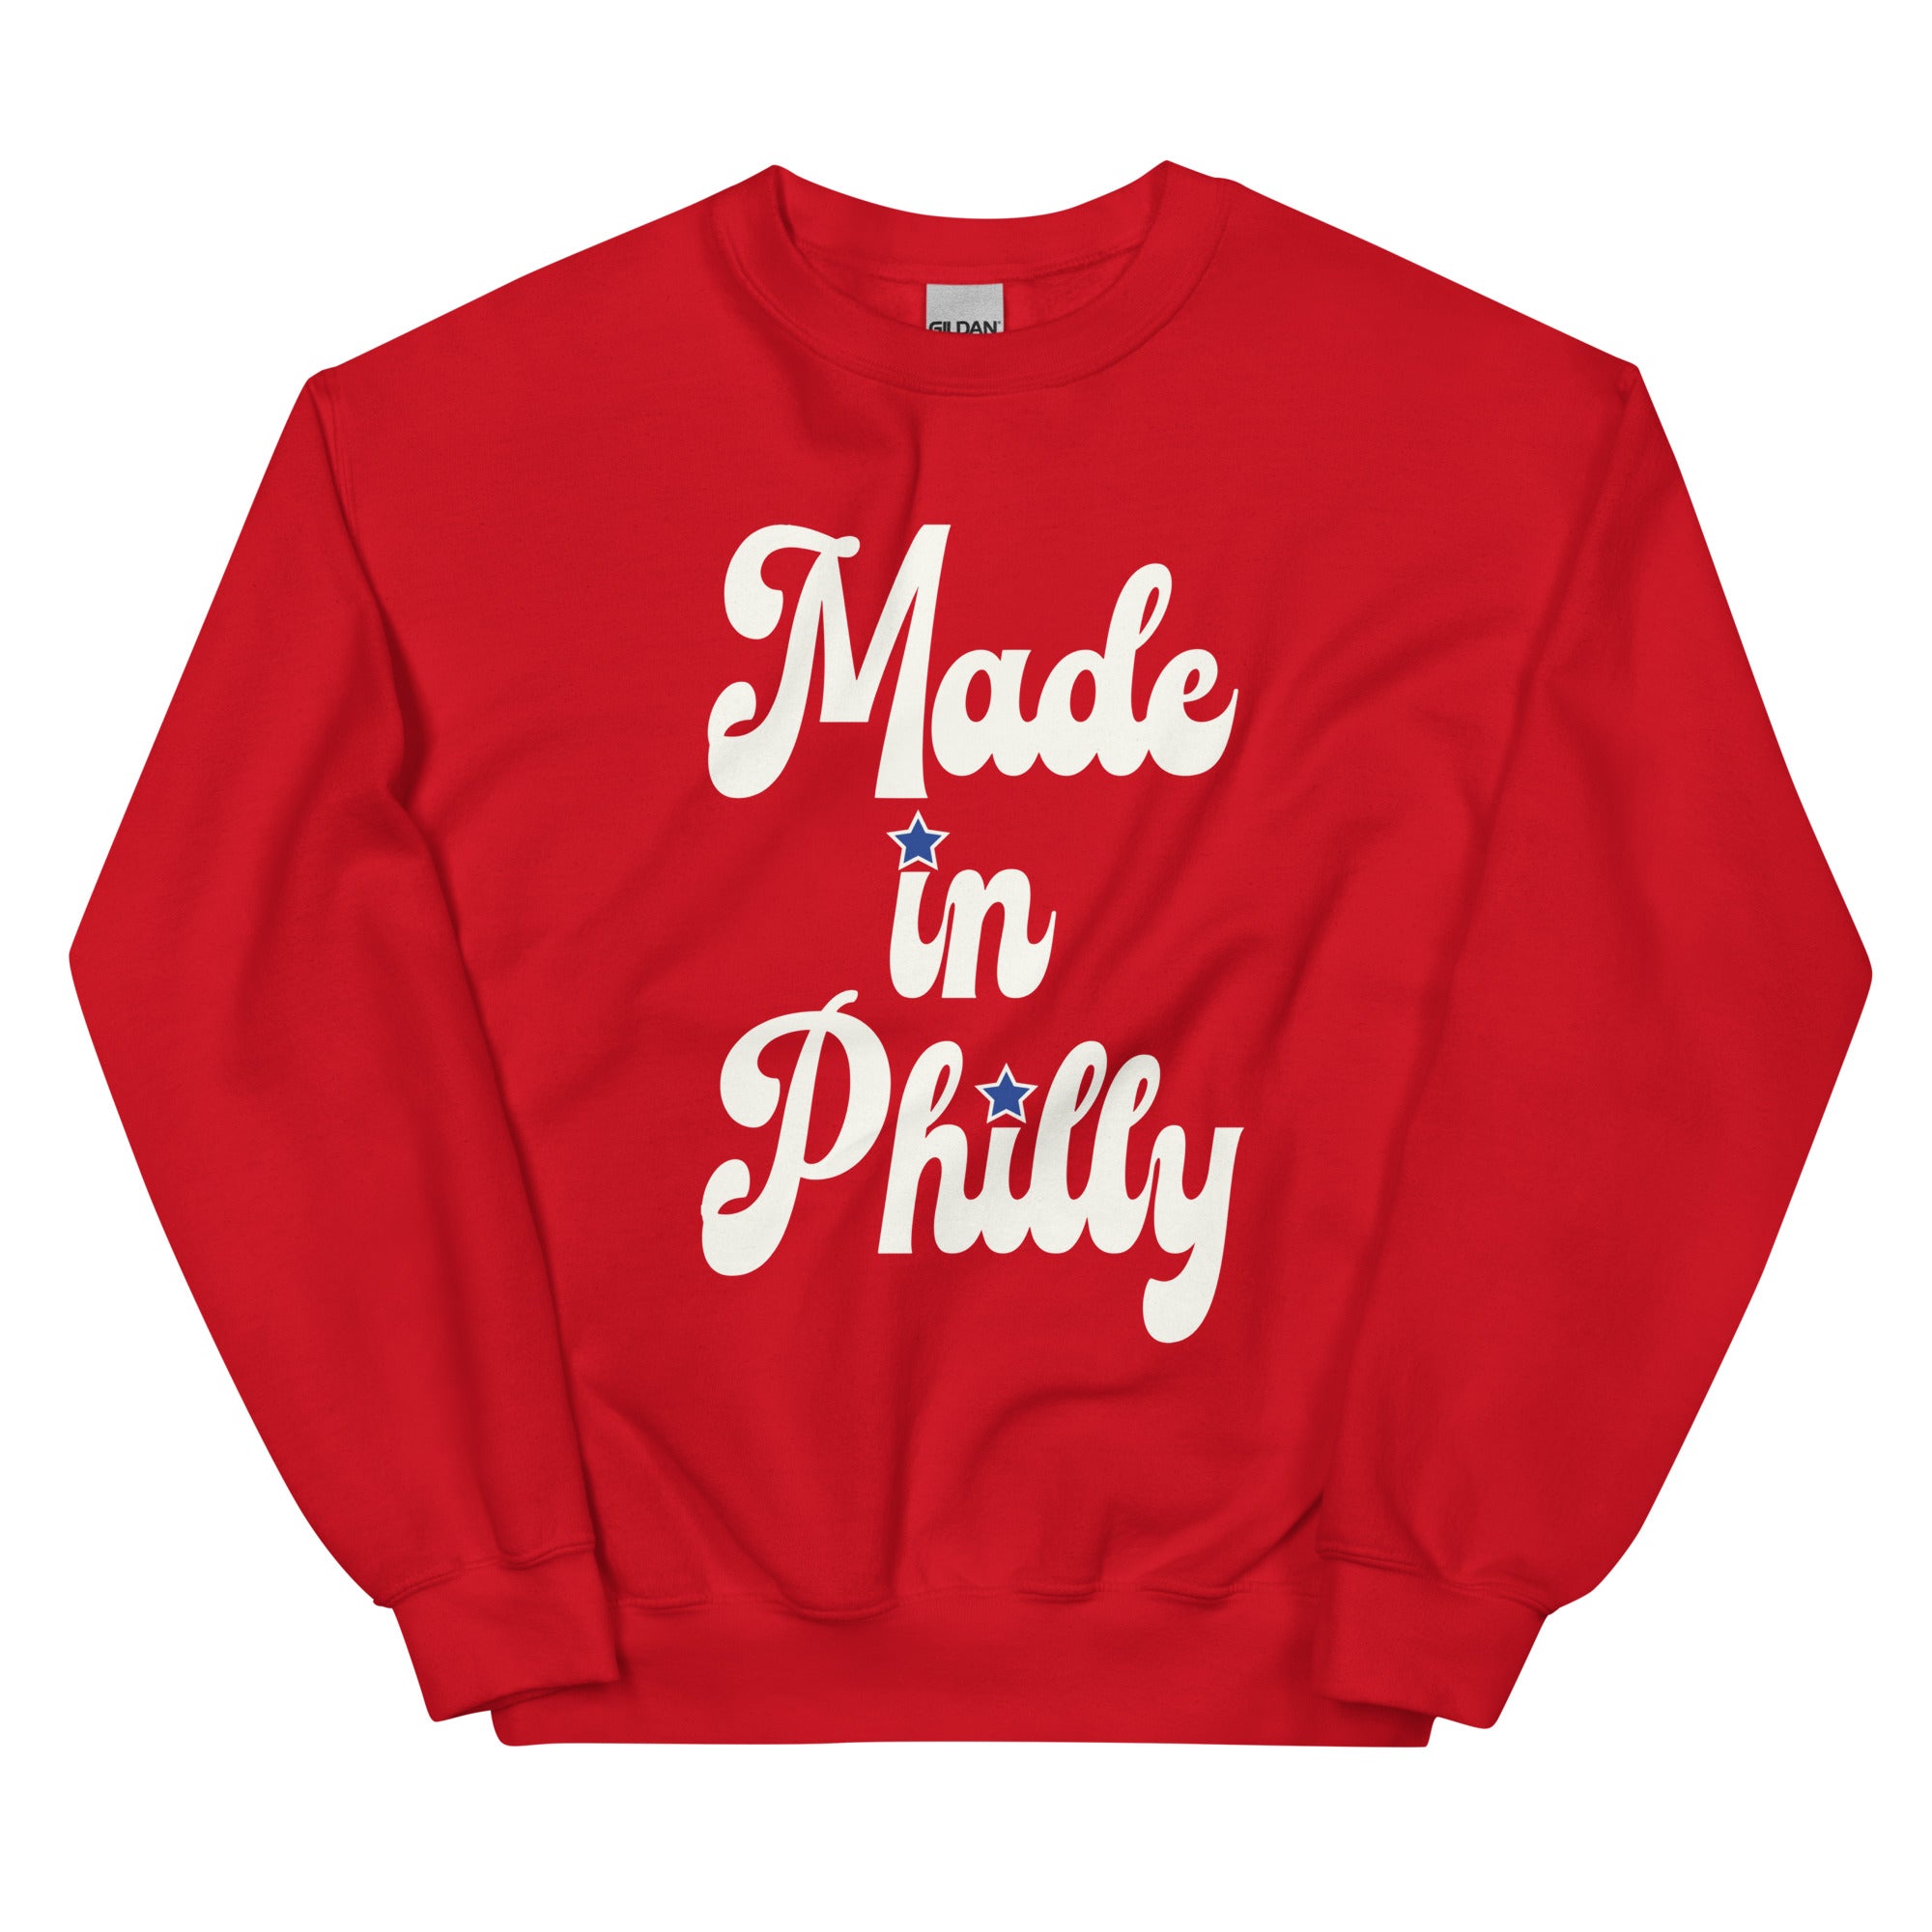 Made in Philly Philadelphia red sweatshirt Phillygoat